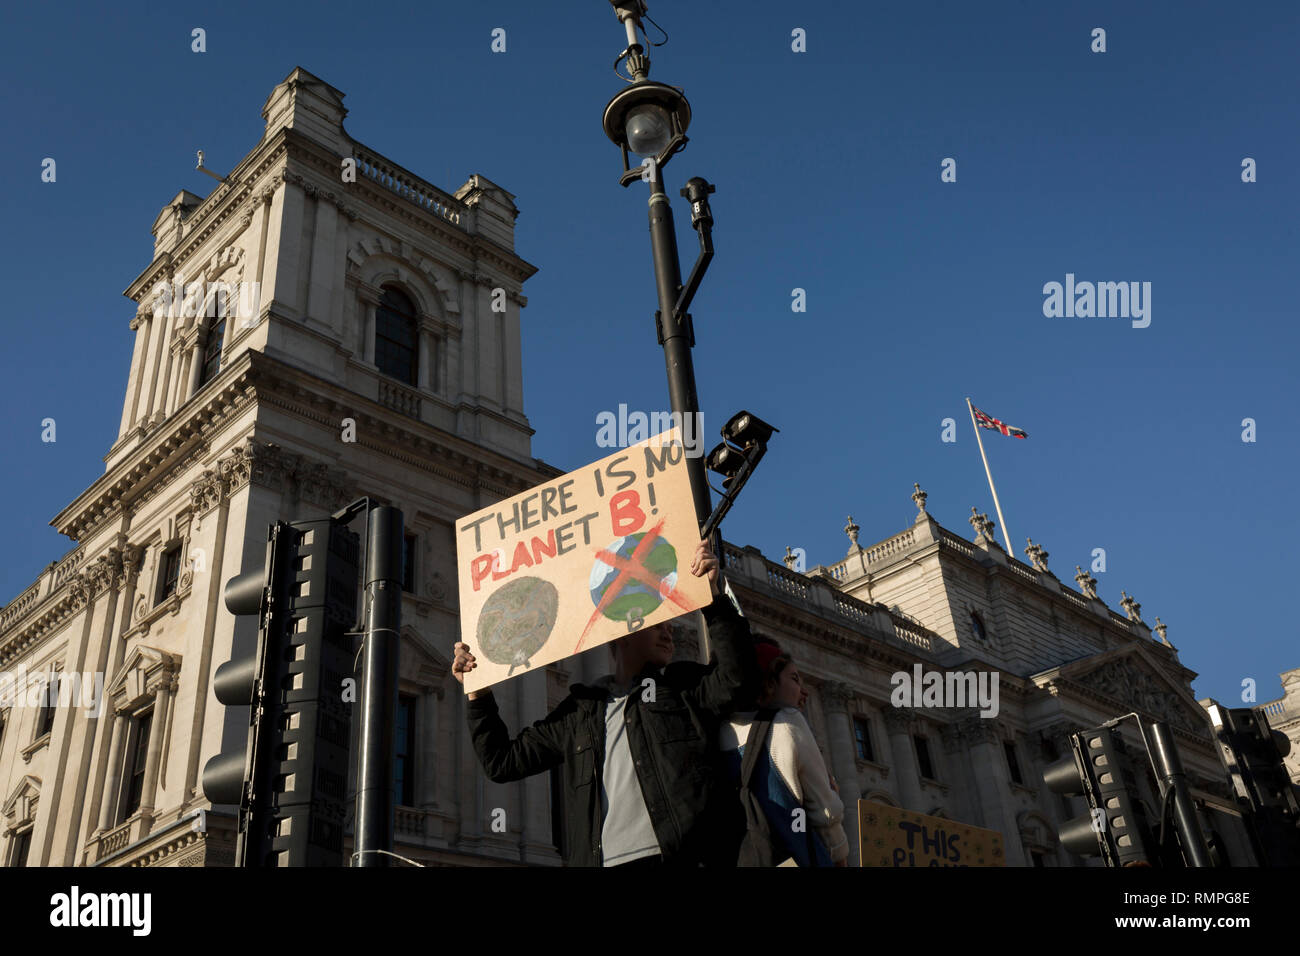 London, UK. 15th Feb, 2019.  Inspired by Swedish teenager Greta Thunberg and organised by Youth Strike 4 Climate, British eco-aware school and college-age pupils protest about Climate Change in Parliament Square during their walkout from classes, on 15th February 2019, in Westminster, London England. Photo by Richard Baker / Alamy Live News Credit: RichardBaker/Alamy Live News Stock Photo